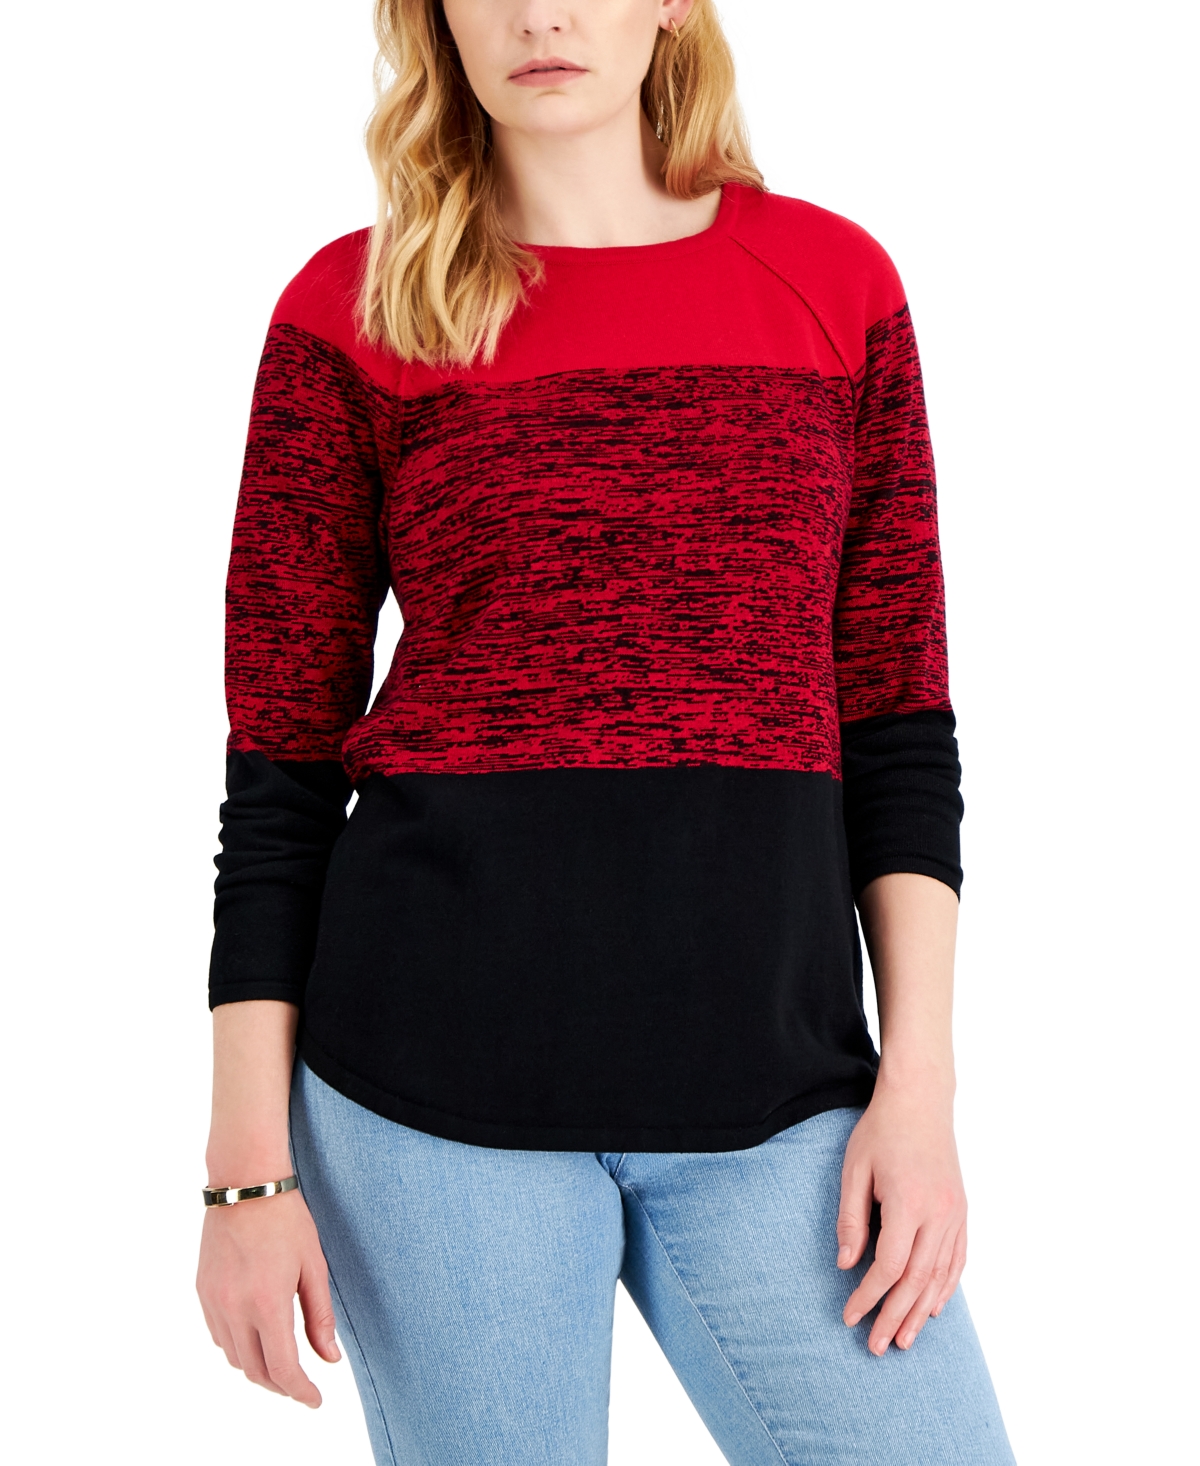 Women's Cotton Colorblocked Sweater, Created for Macy's - New Red Amore